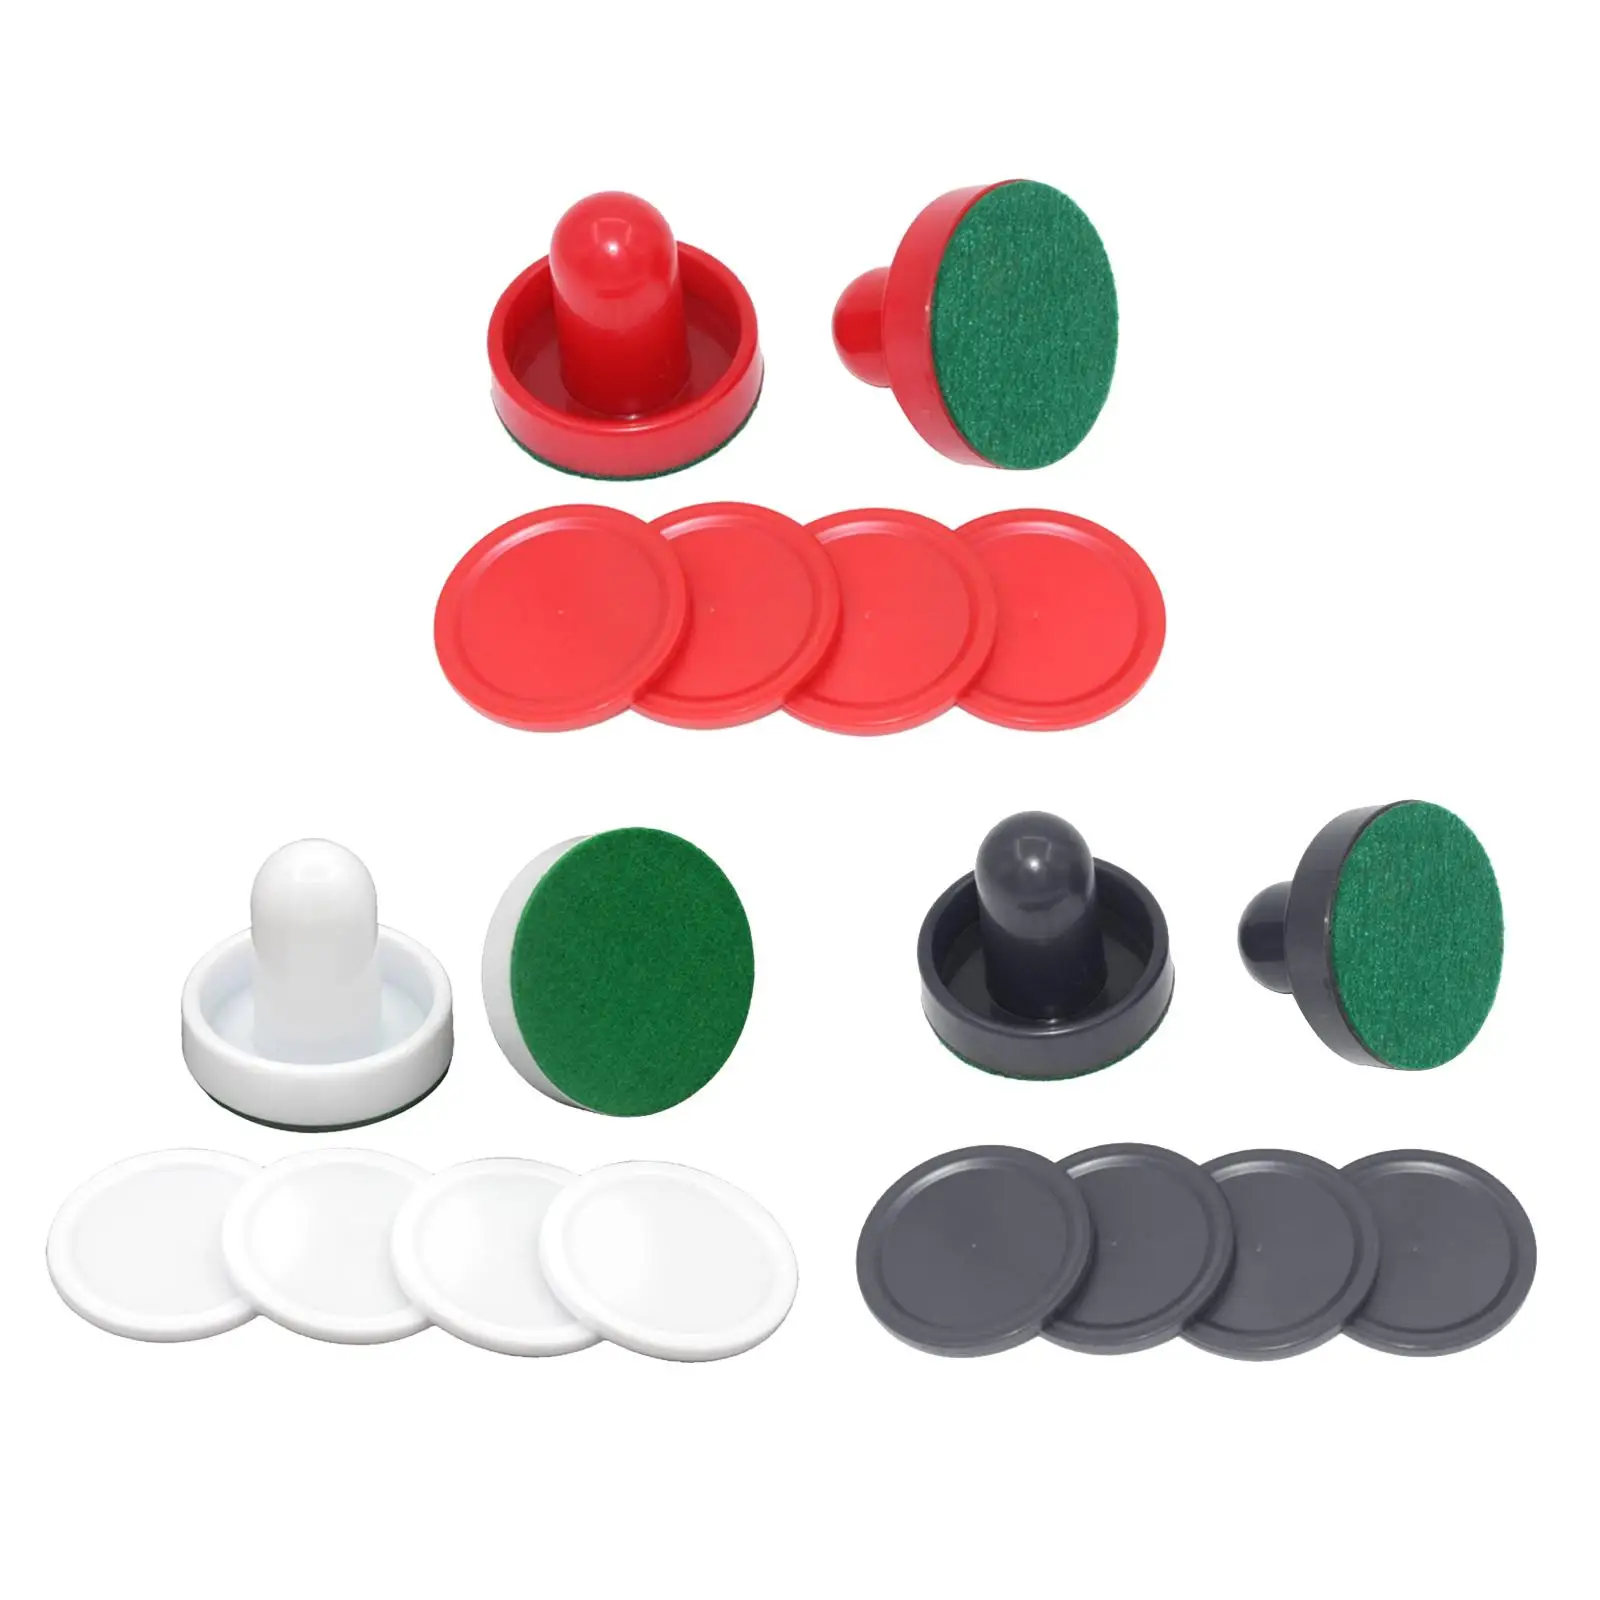 Carry Stone Air Hockey Accessories Table Hockey Accessories Pucks And Pushers Accessories for Game Tables